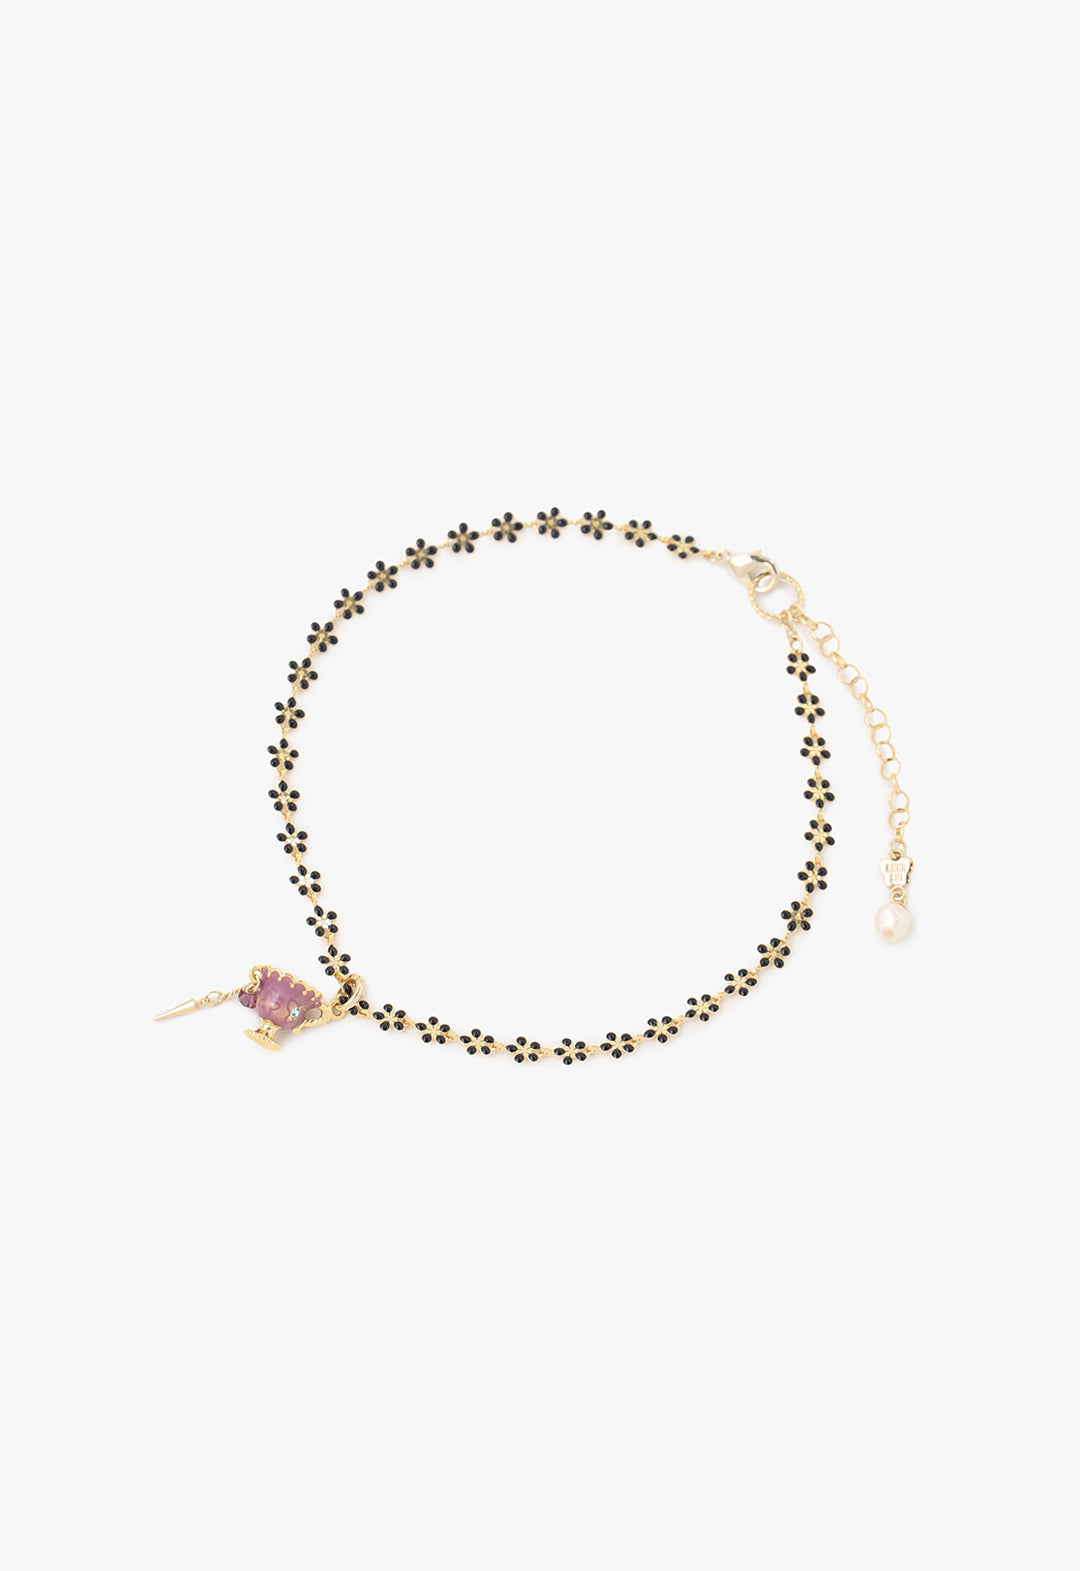 Choker Necklace, with a pink teacup charm gold accent, links designed like black 5 petals flowers